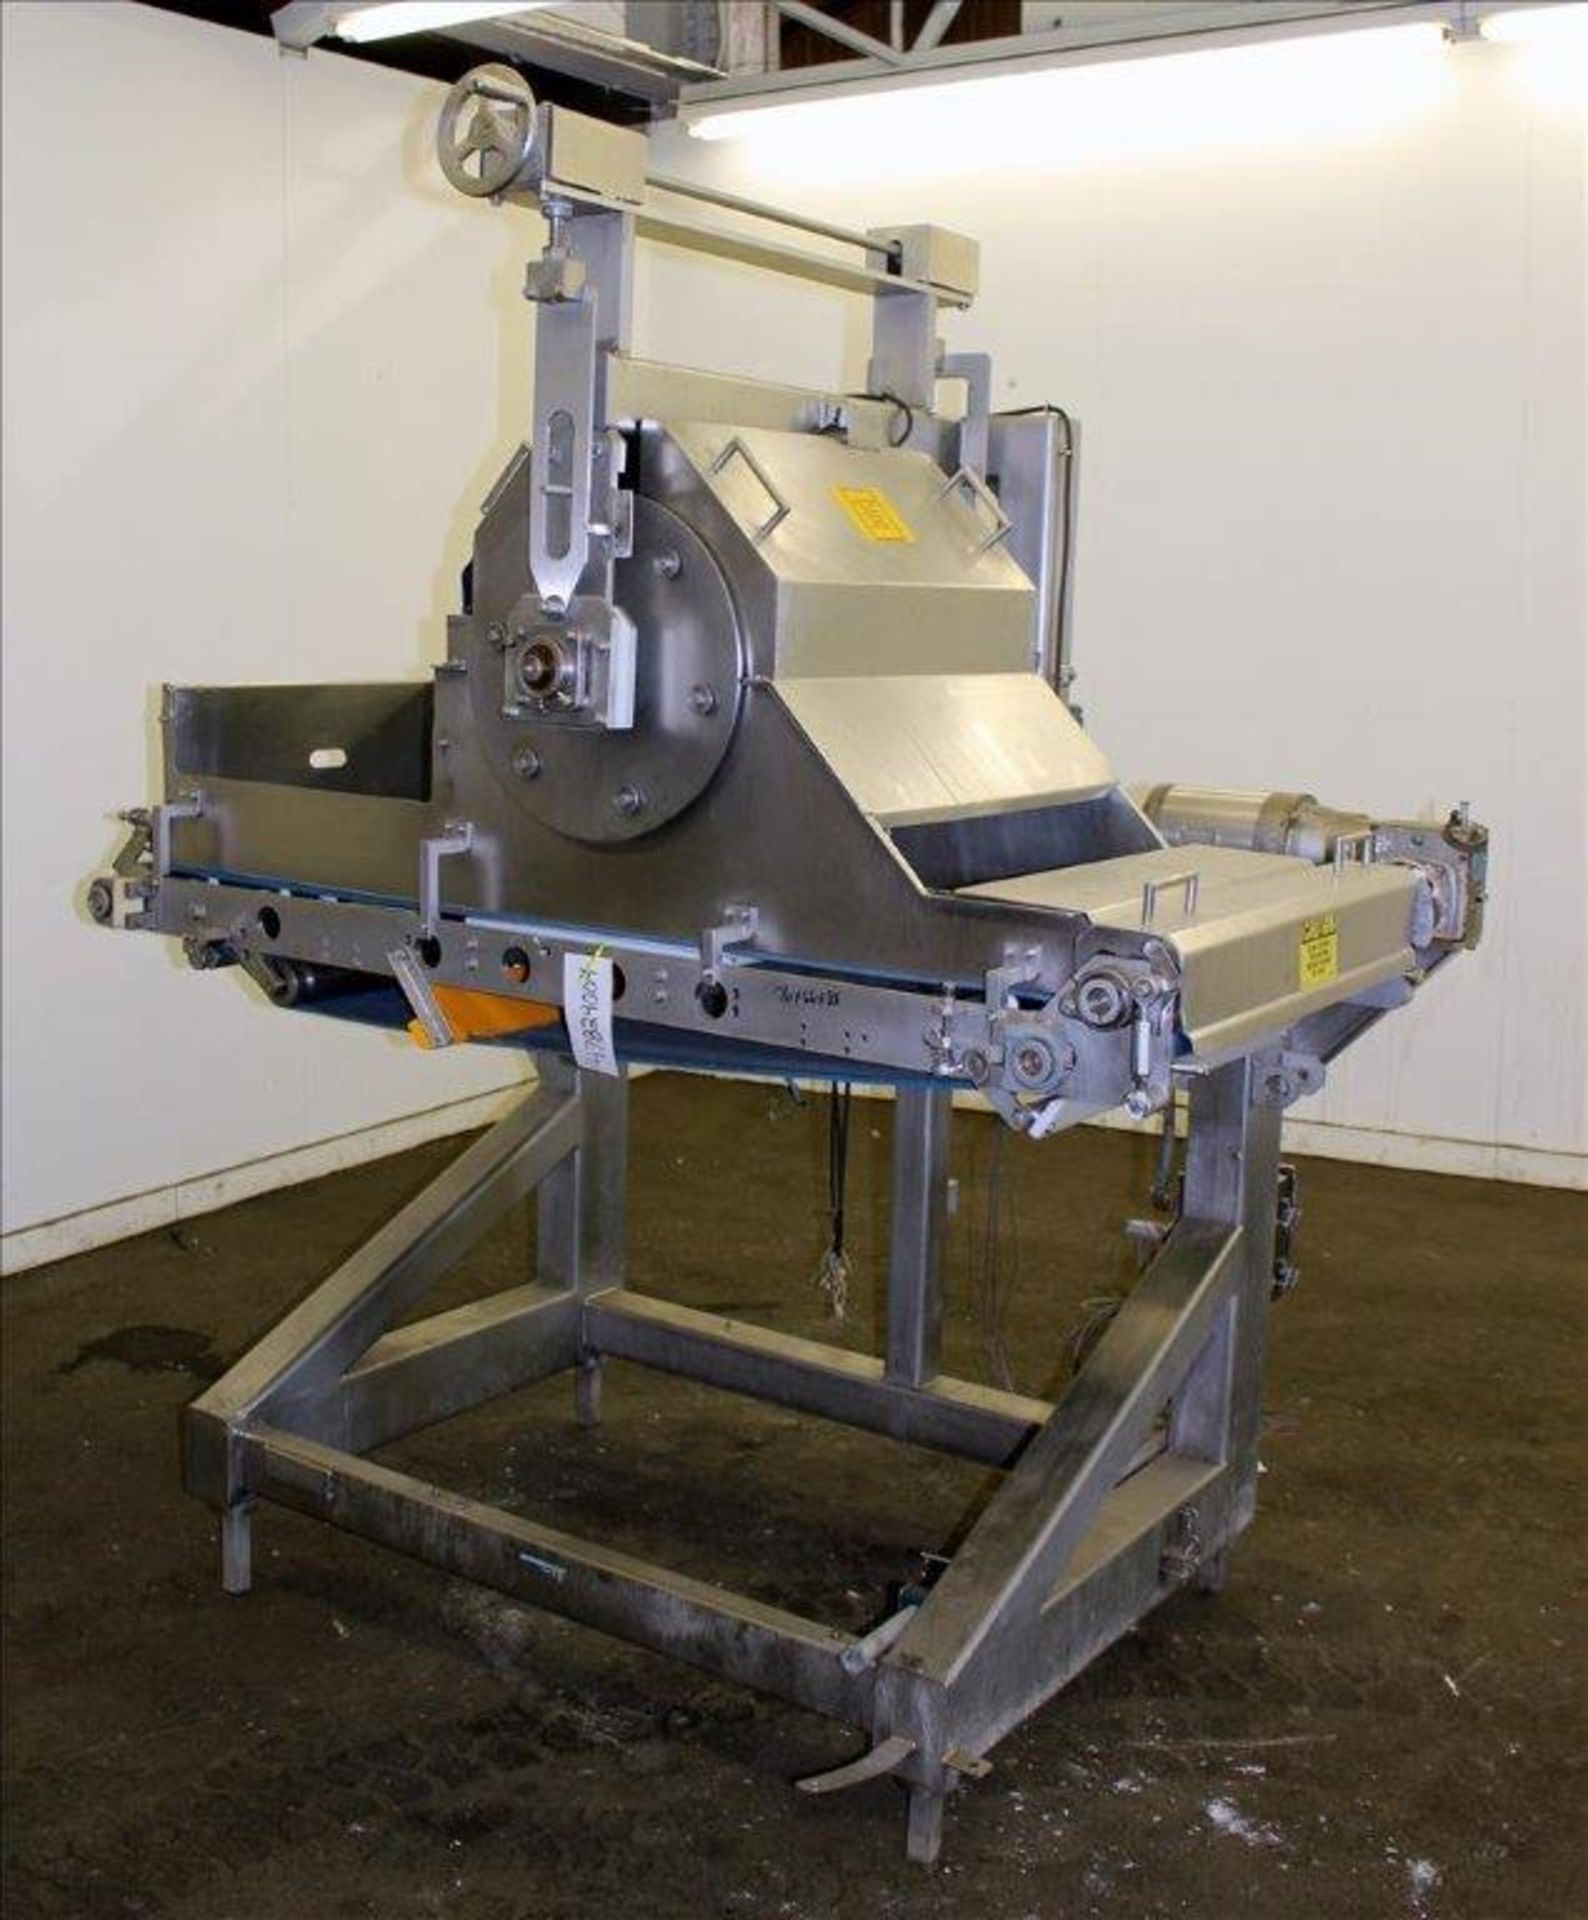 Waterfall Cheese/Applicator for Pizza, 304 Stainless Steel. Has 28" wide x 60" long belt conveyor - Image 42 of 46